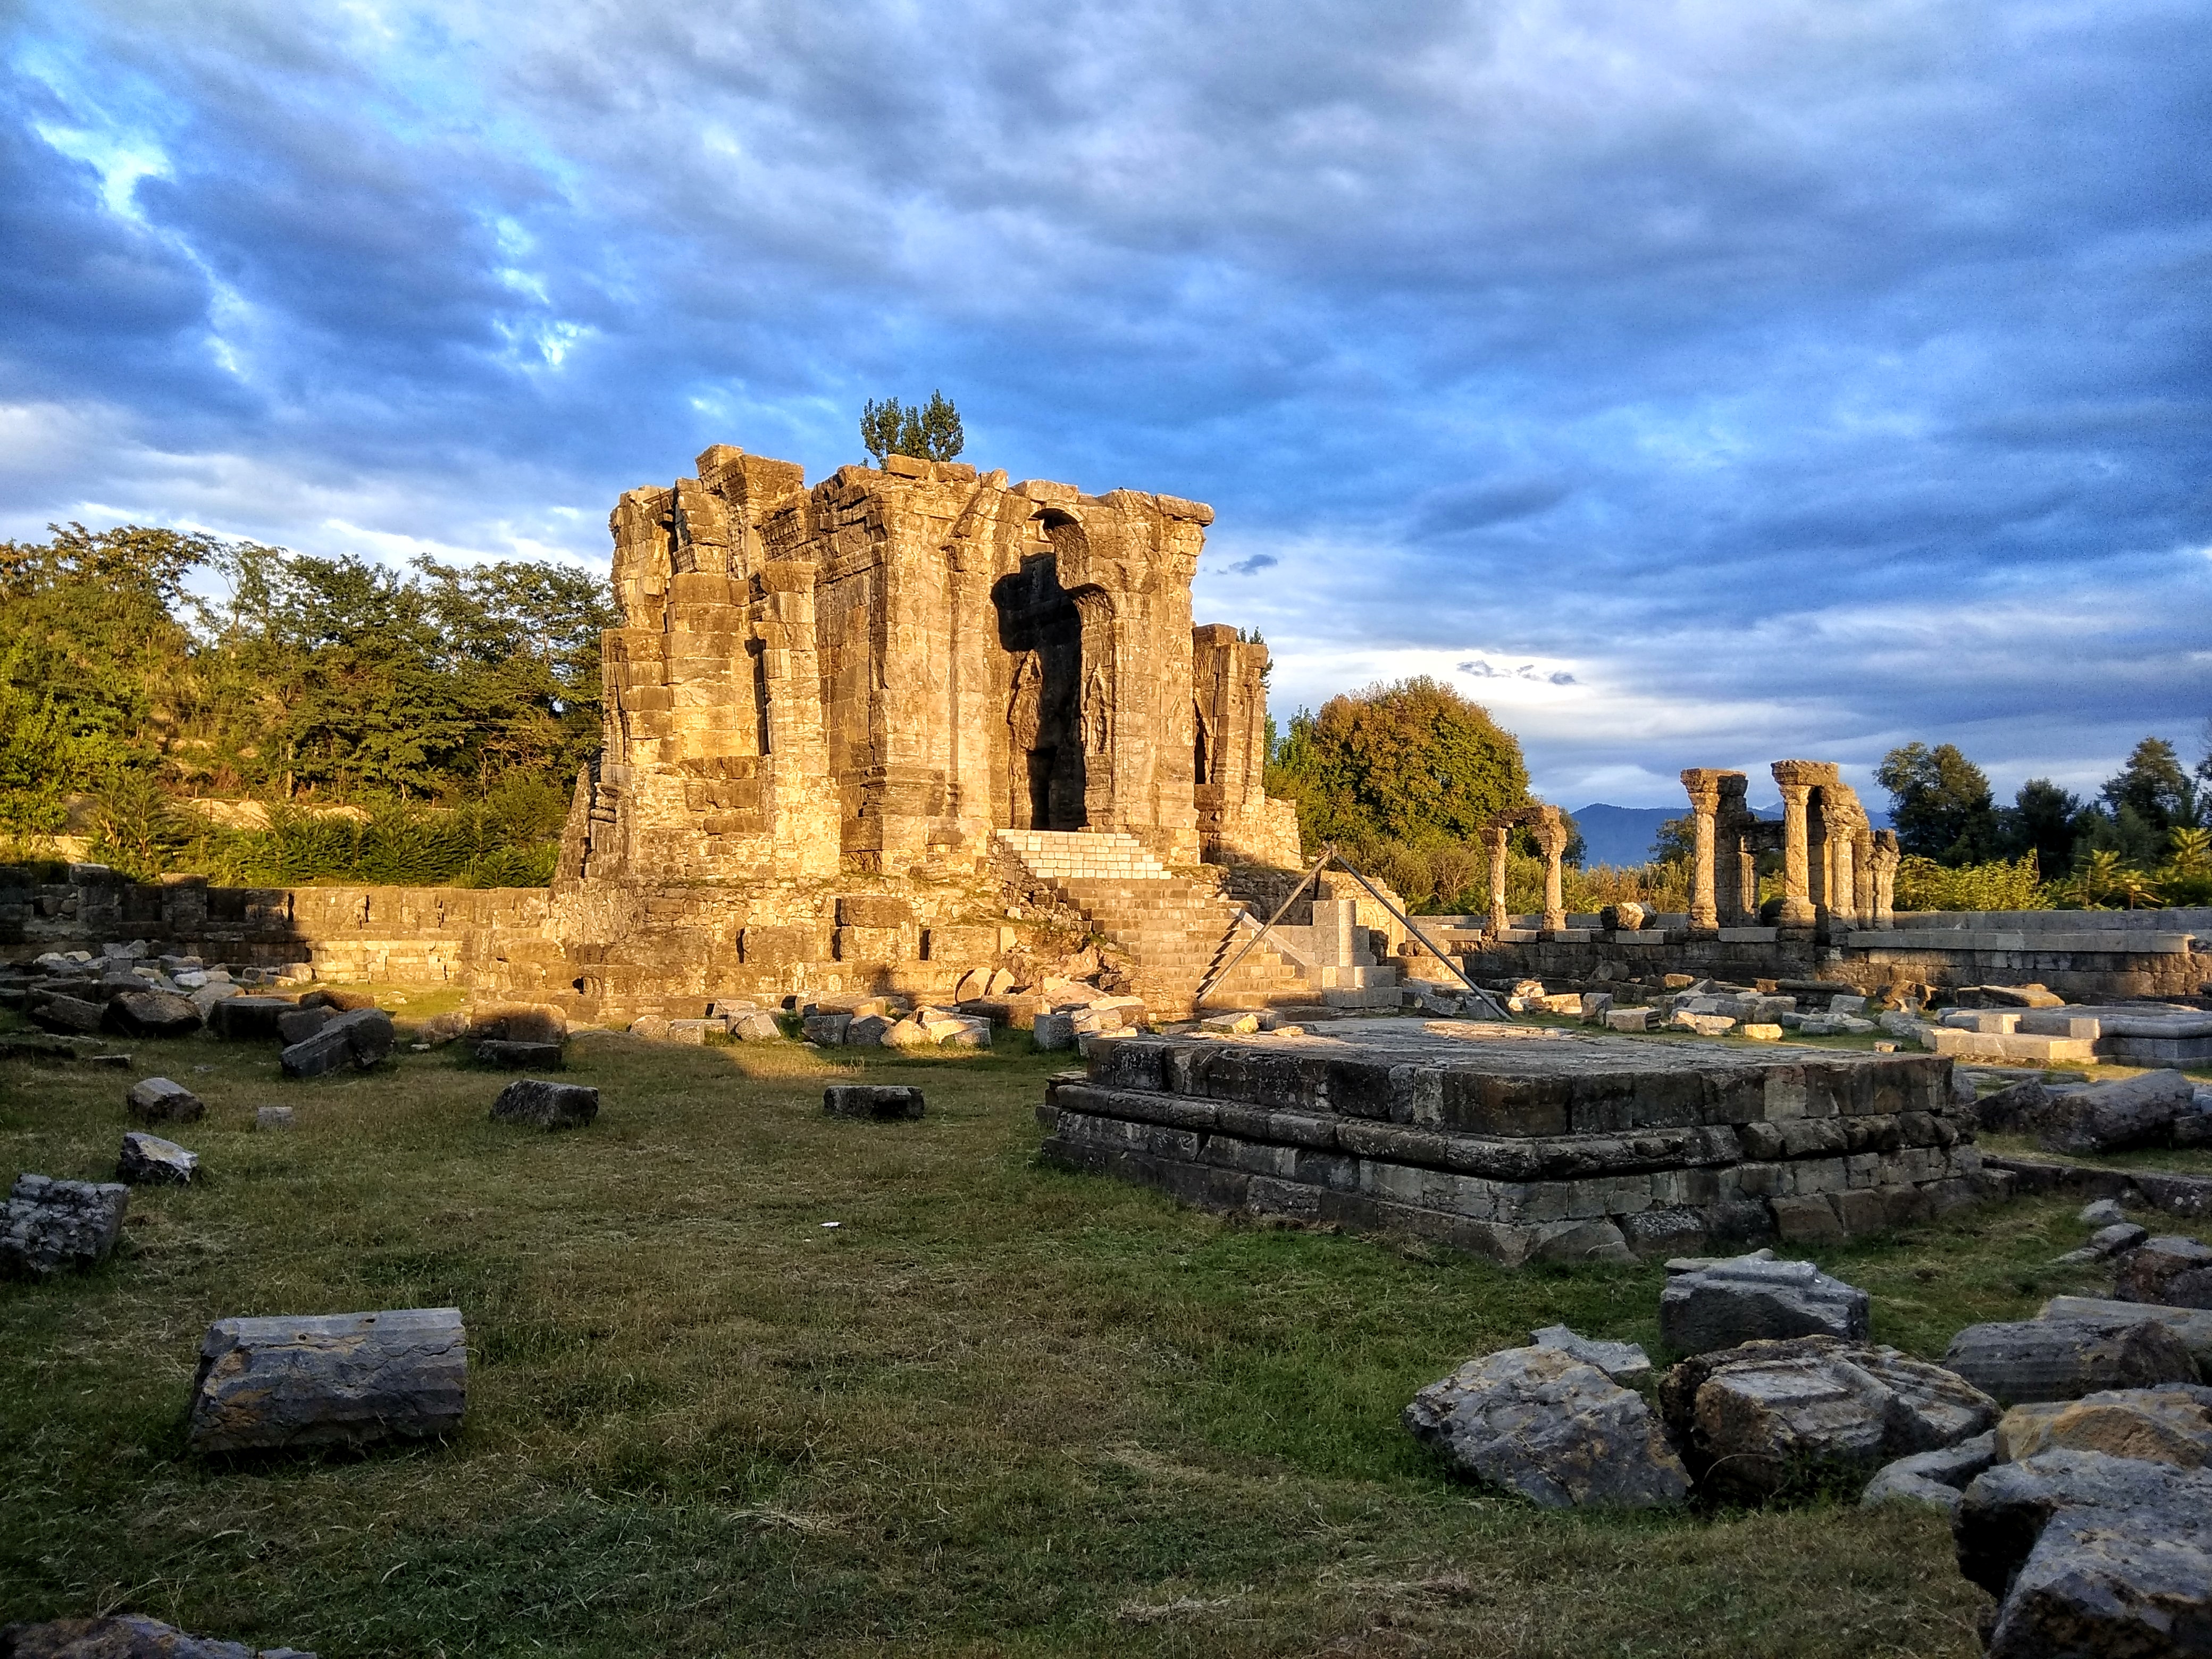 ‘Flight of the Deity’ from Martand Temple, Kashmir – Part 1